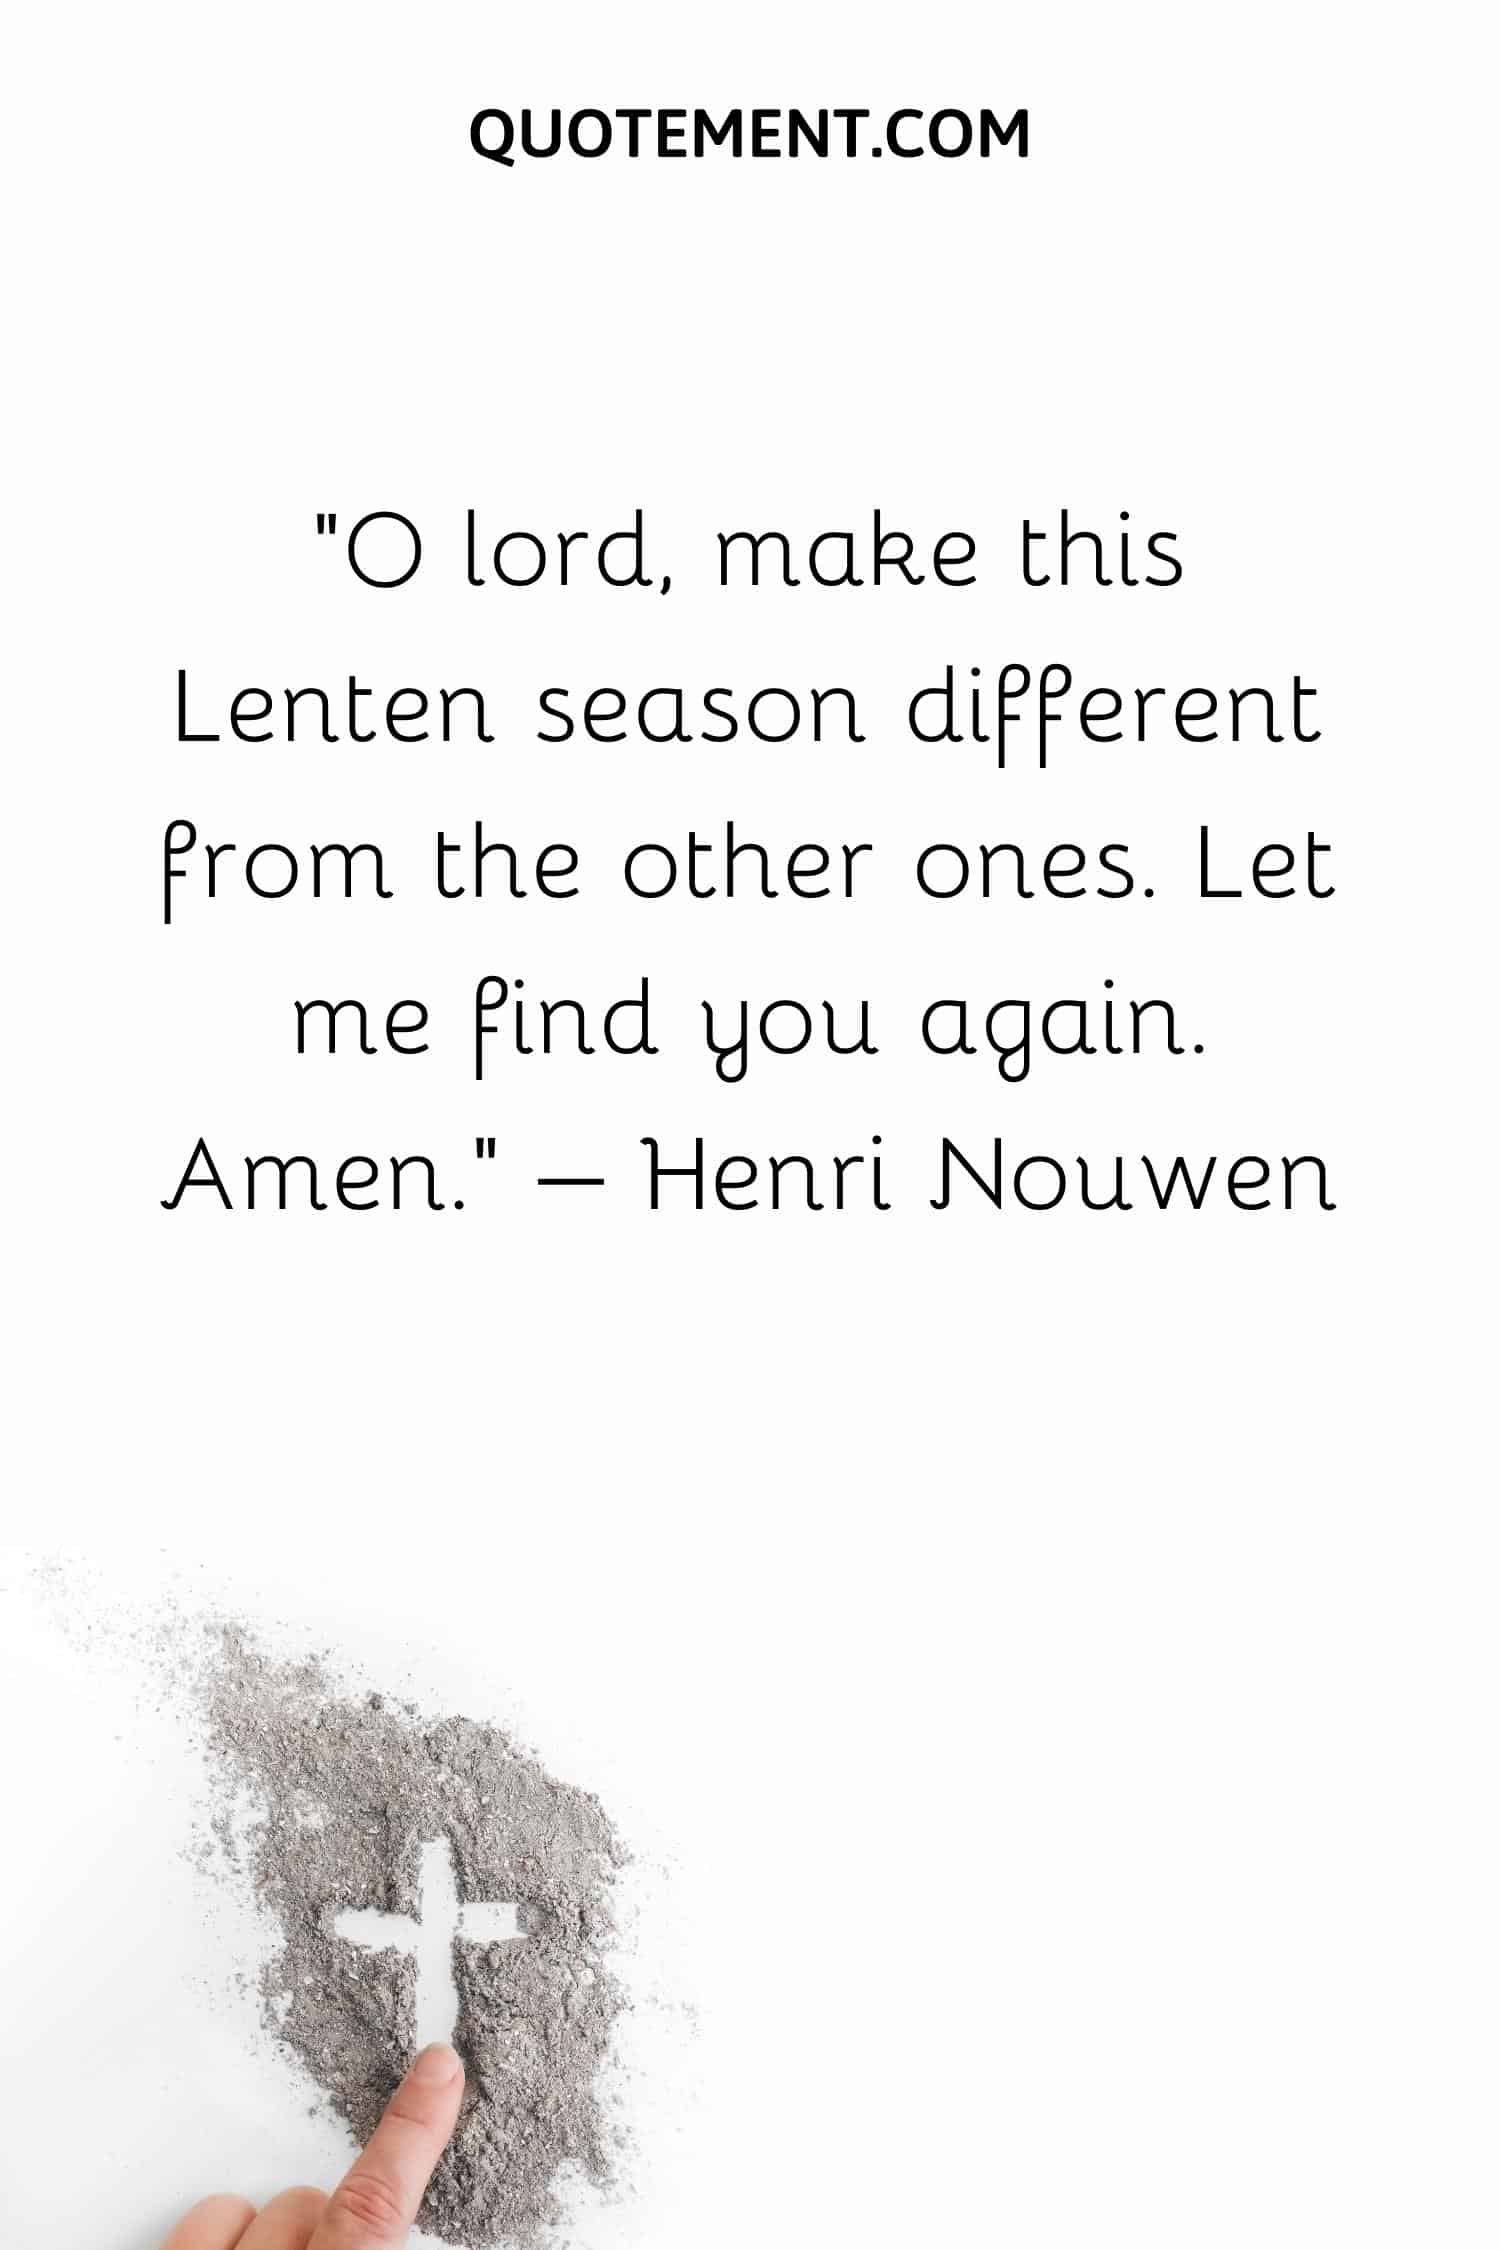 O lord, make this Lenten season different from the other ones